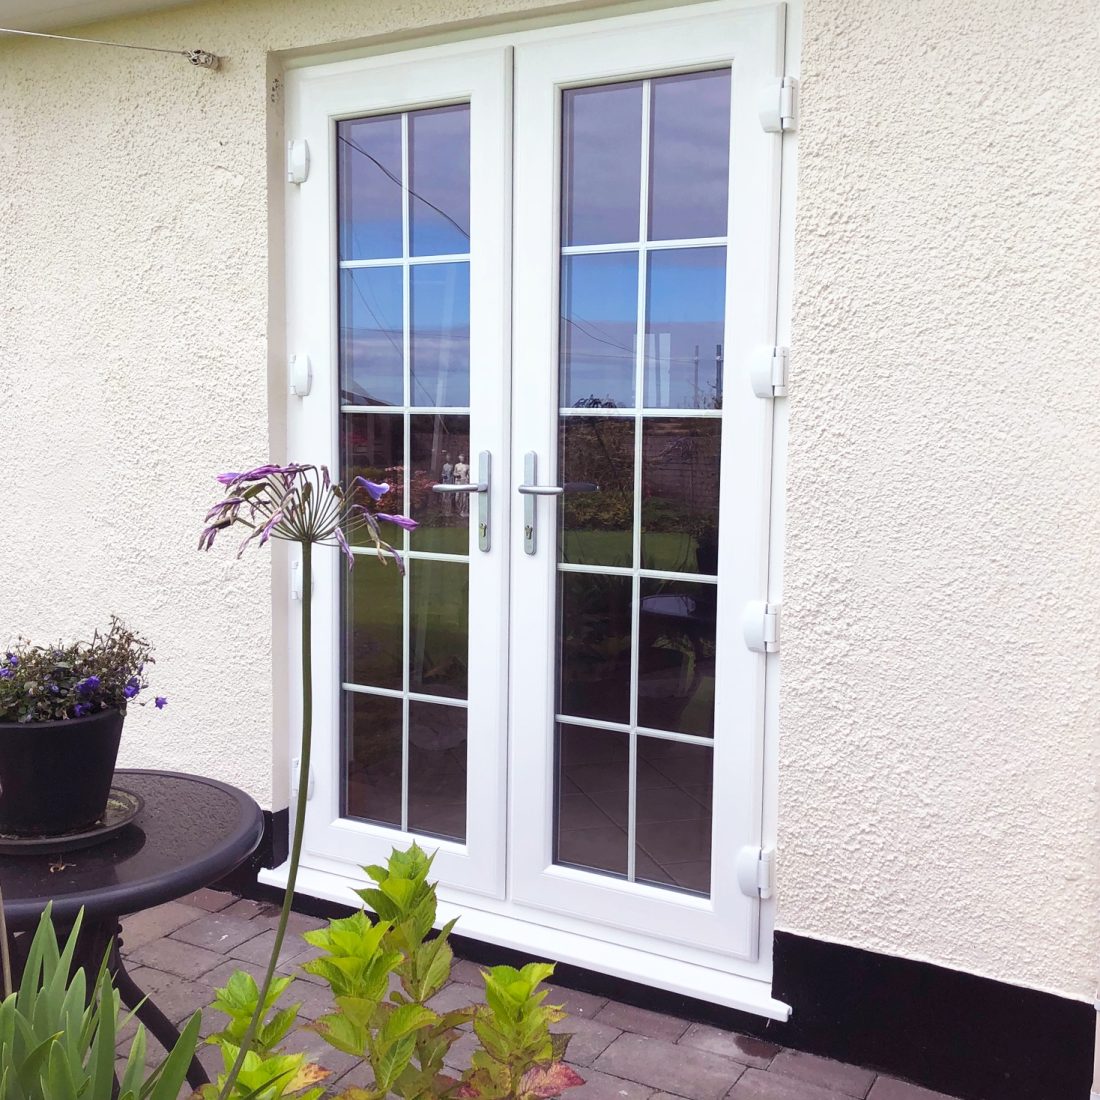 Double French doors in white with bar detailing on windows.